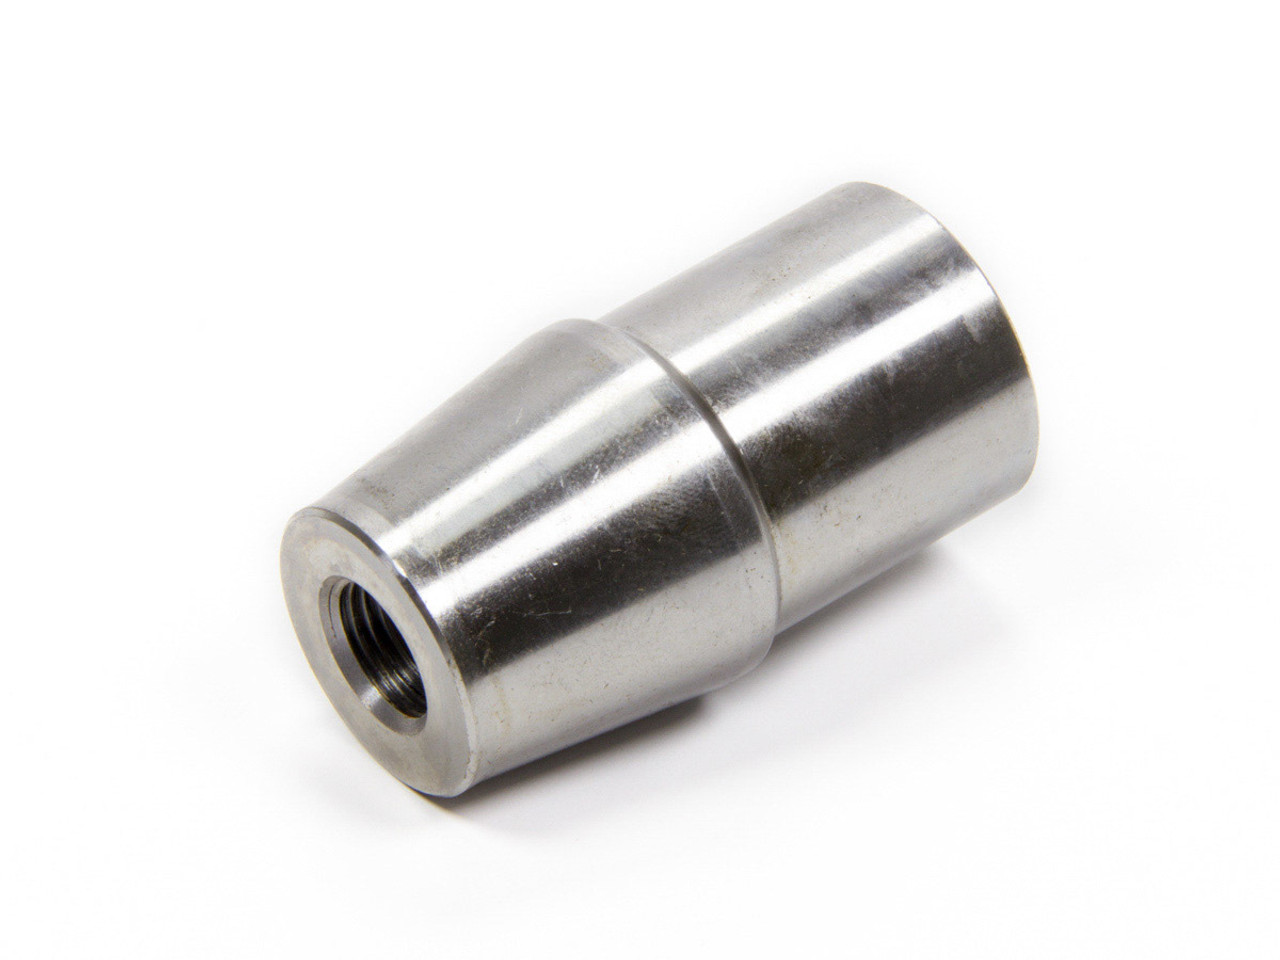 5/8-18 LH Tube End - 1-1/4in x  .058in